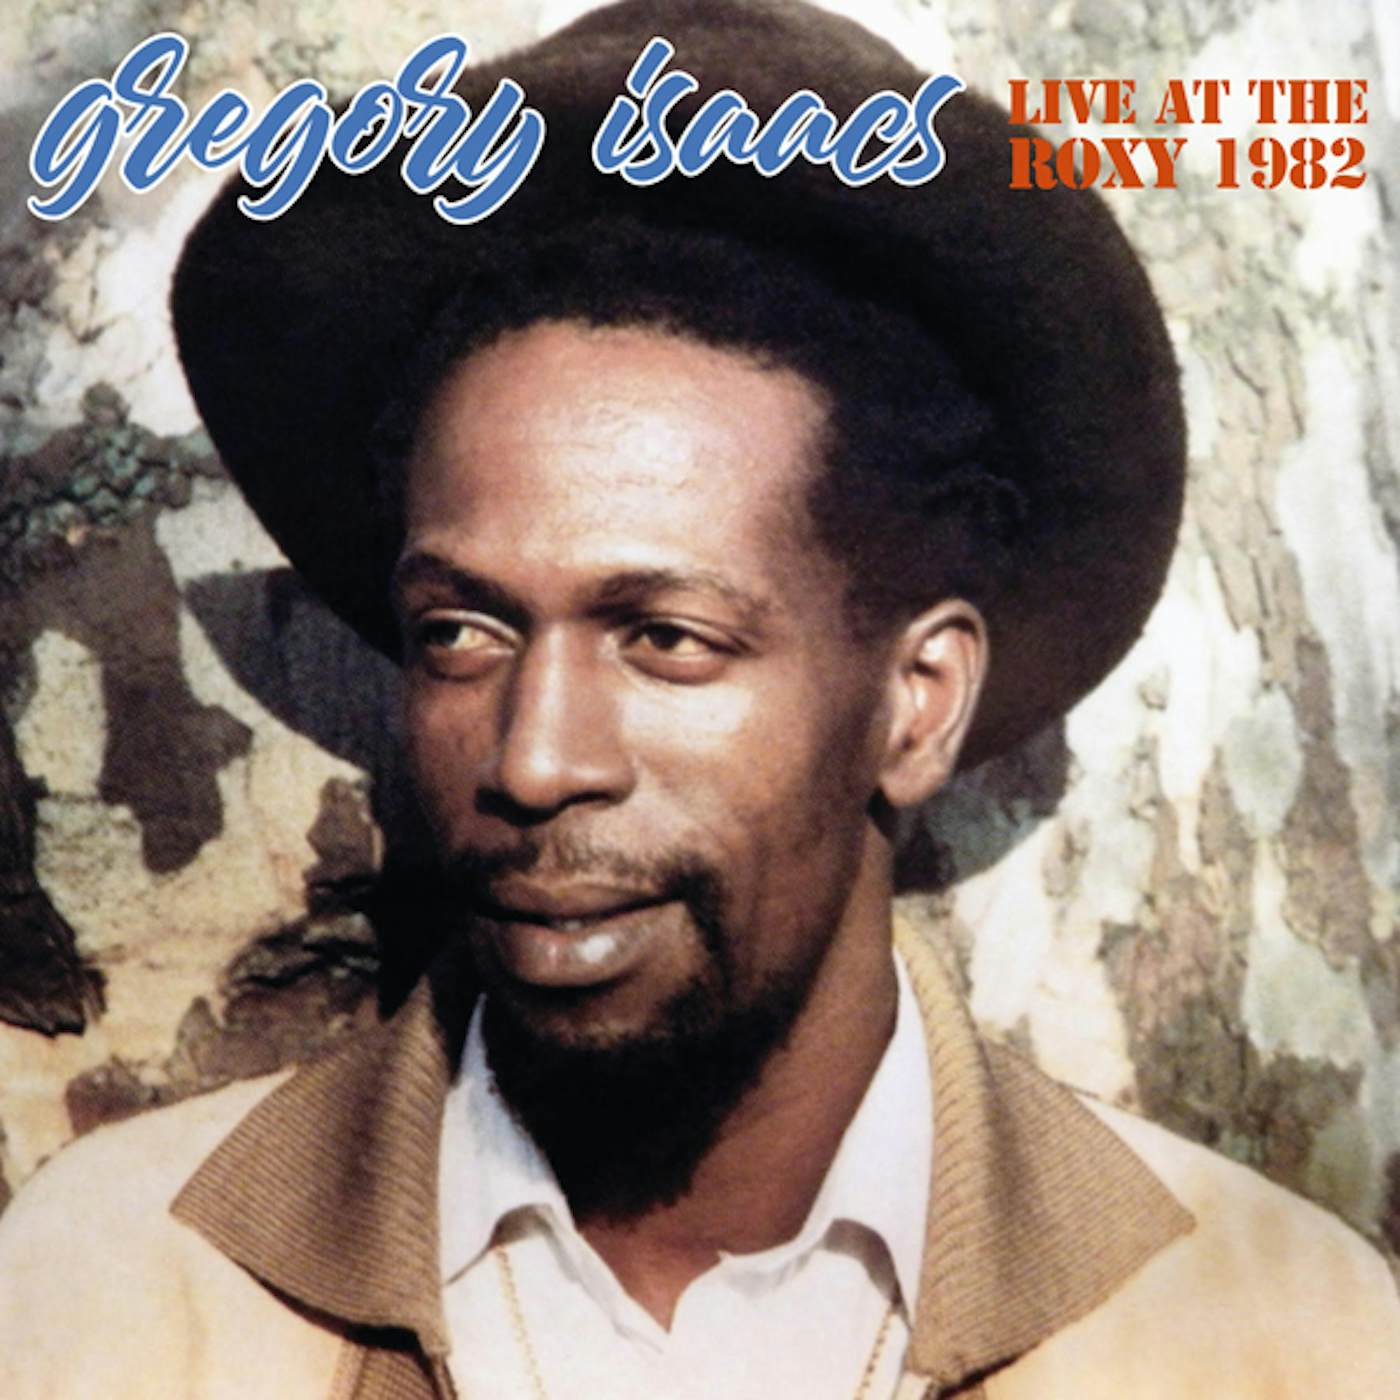 Gregory Isaacs LIVE AT THE ROXY Vinyl Record